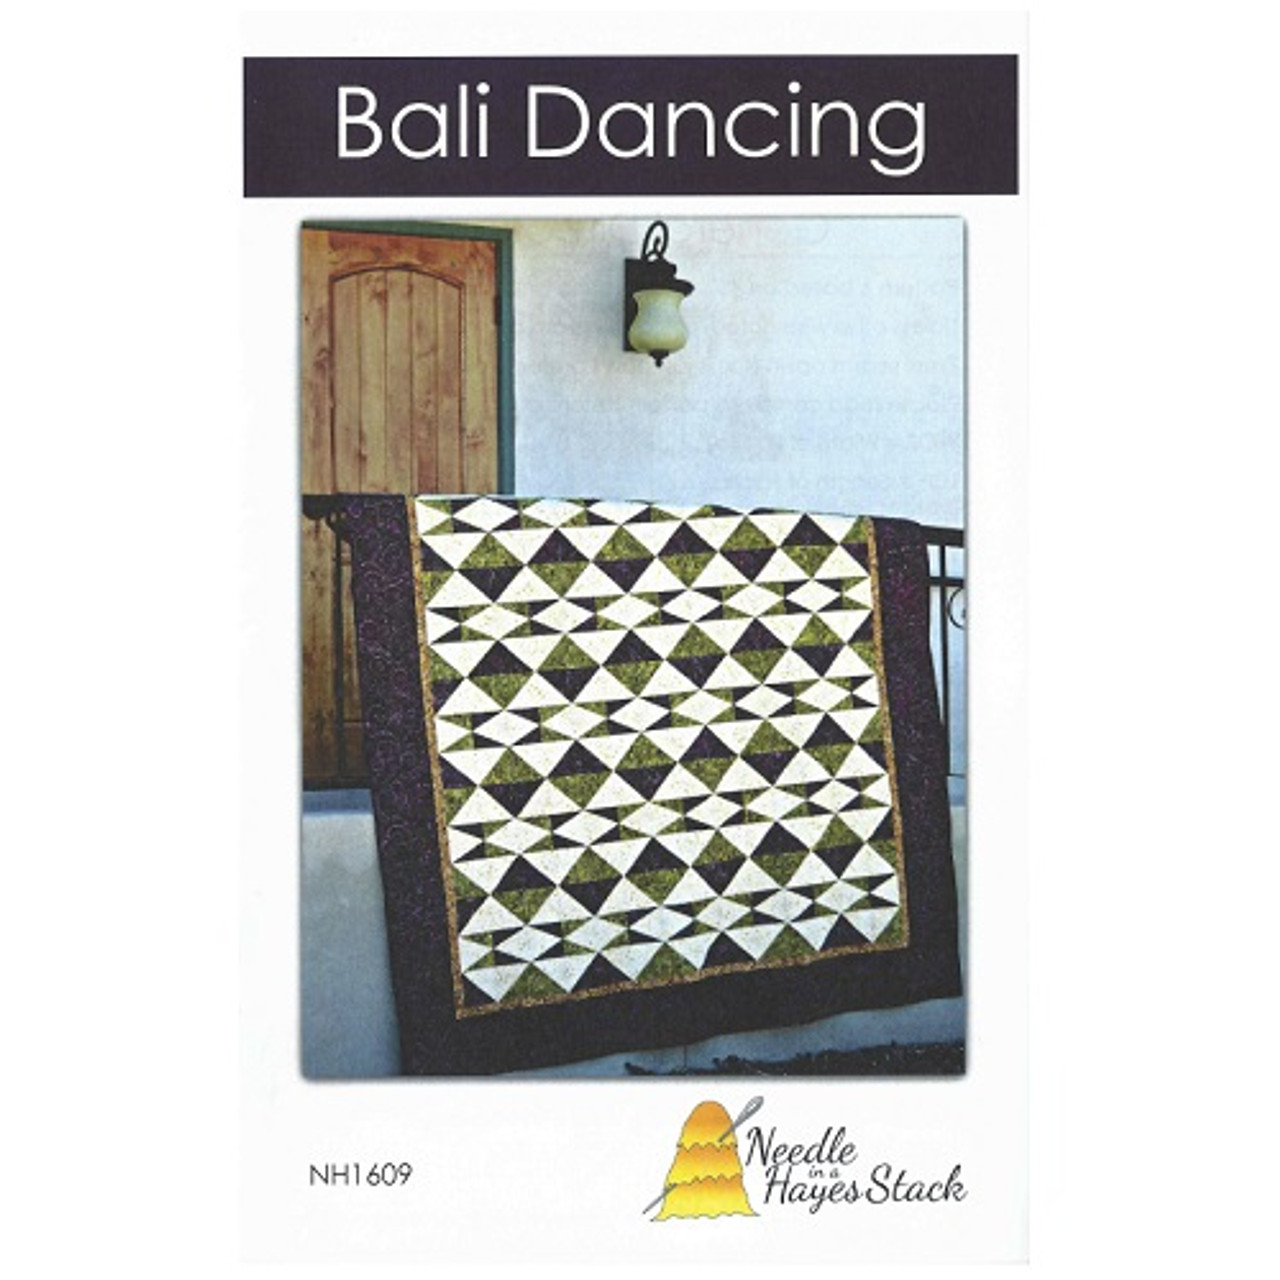 Bali Dancing - Needle In A Hayes Stack - Pattern